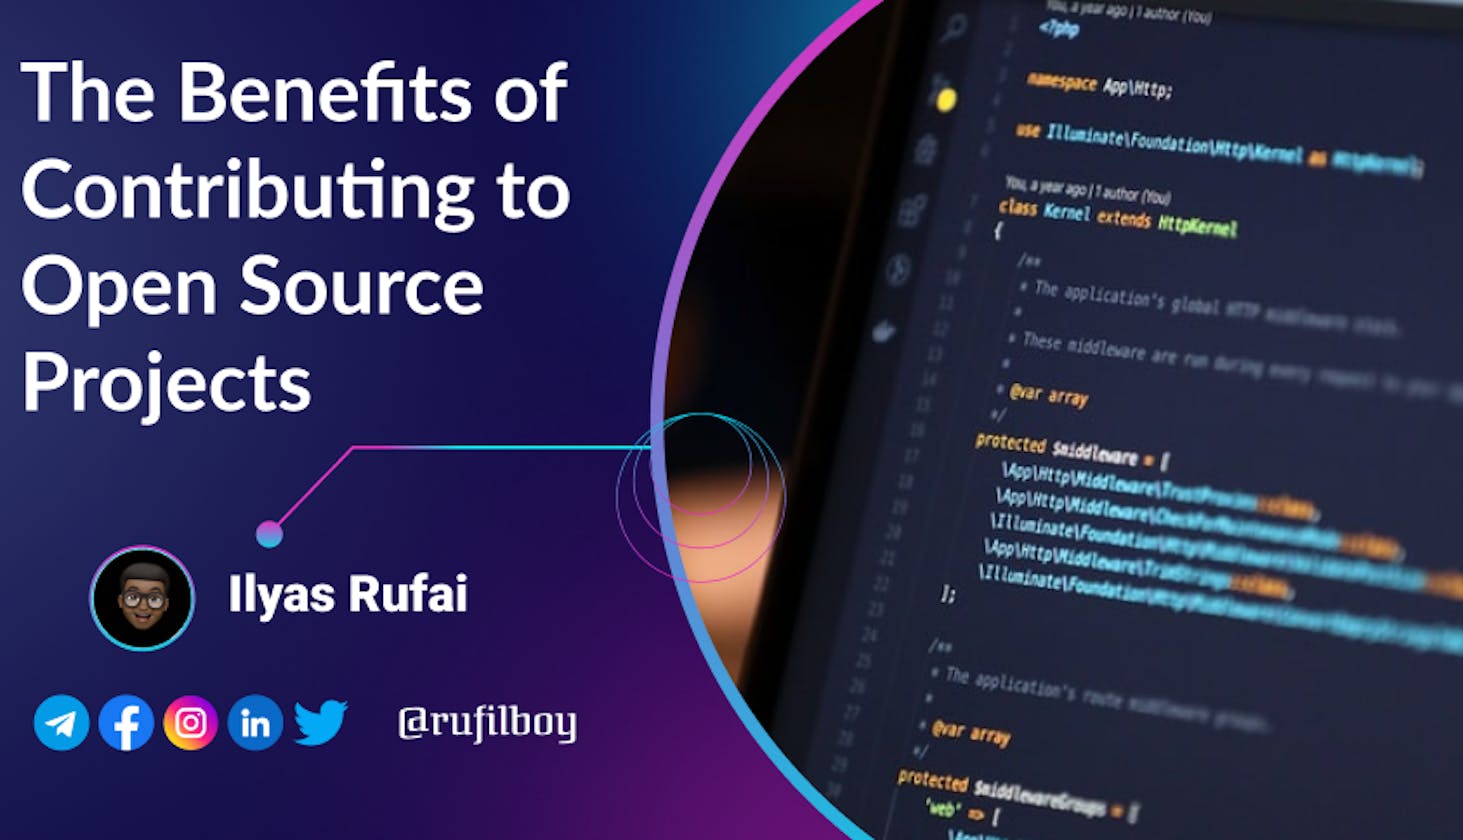 The Benefits of Contributing to Open Source Projects